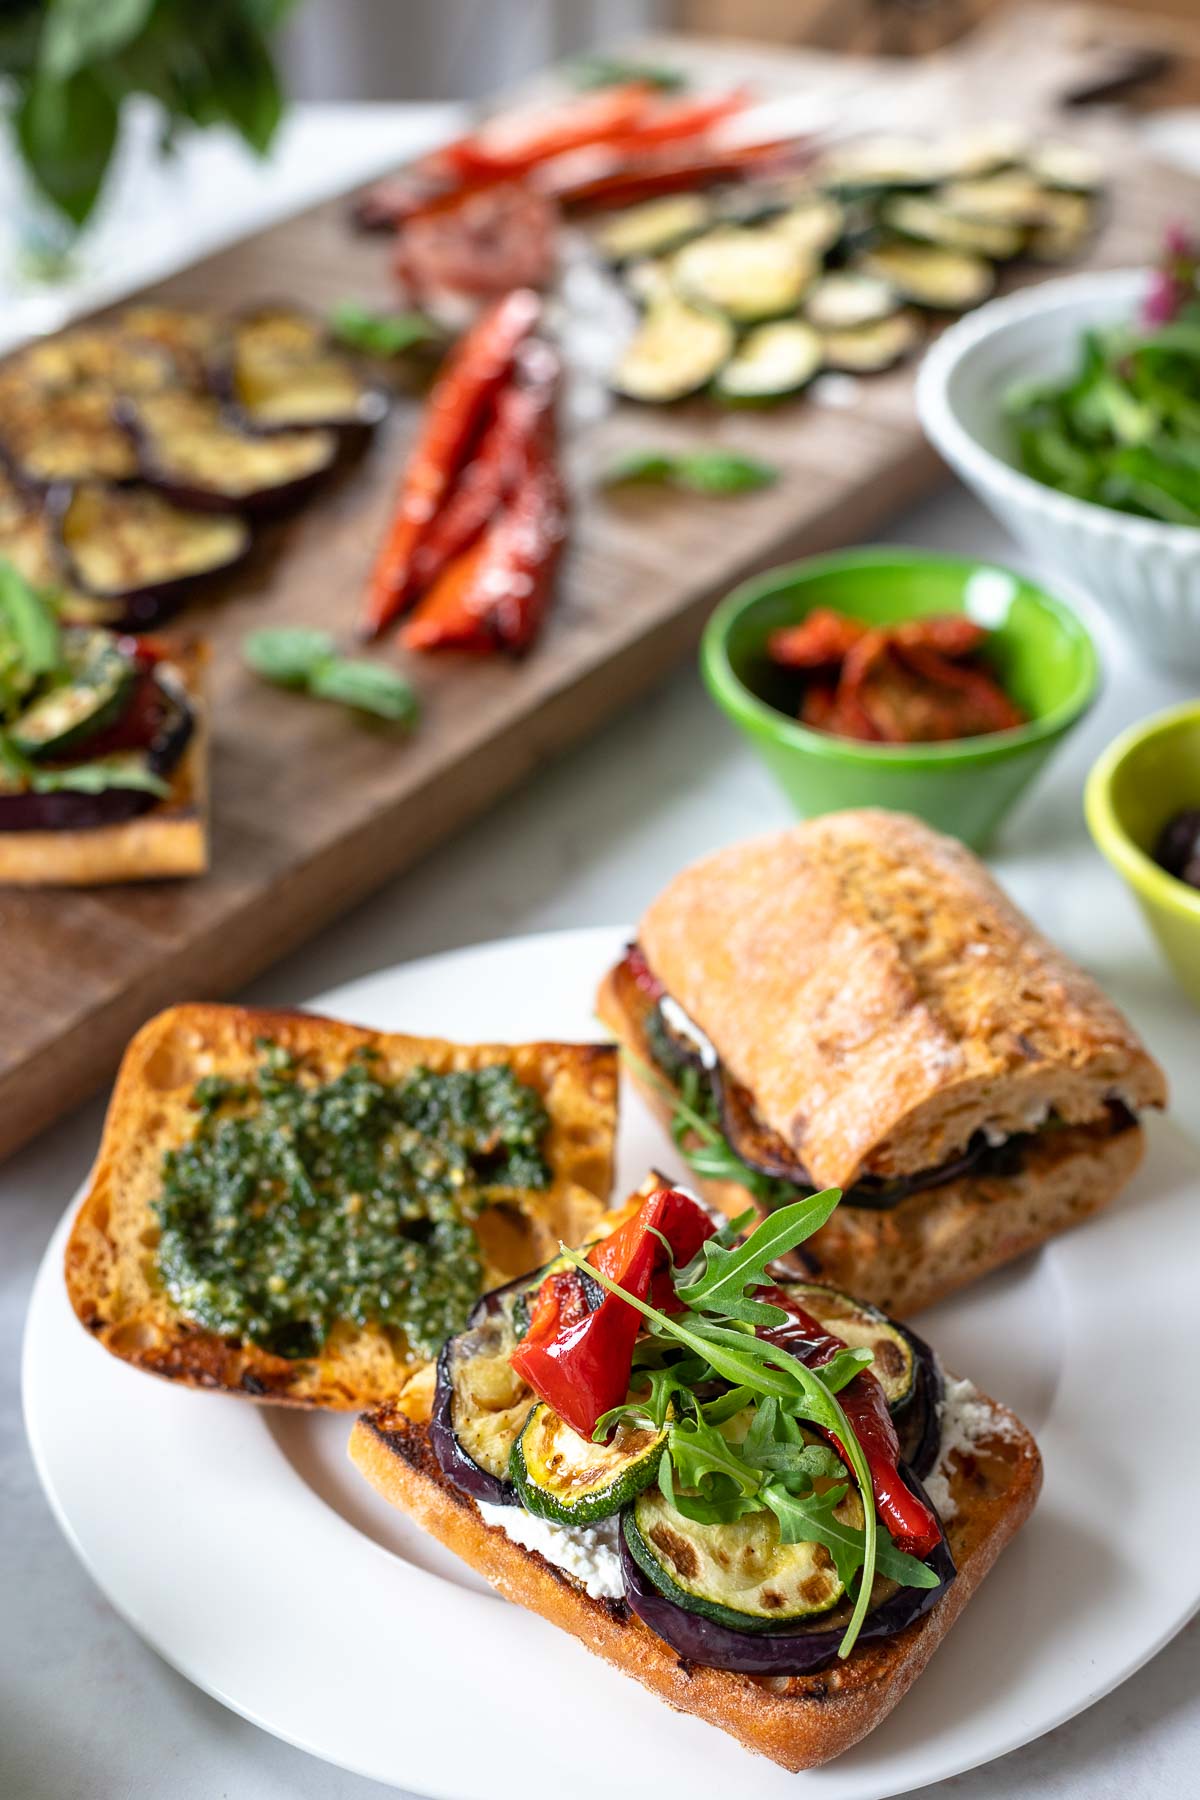 Italian antipasti sandwich with grilled vegetables (zucchini, bell pepper, eggplant)